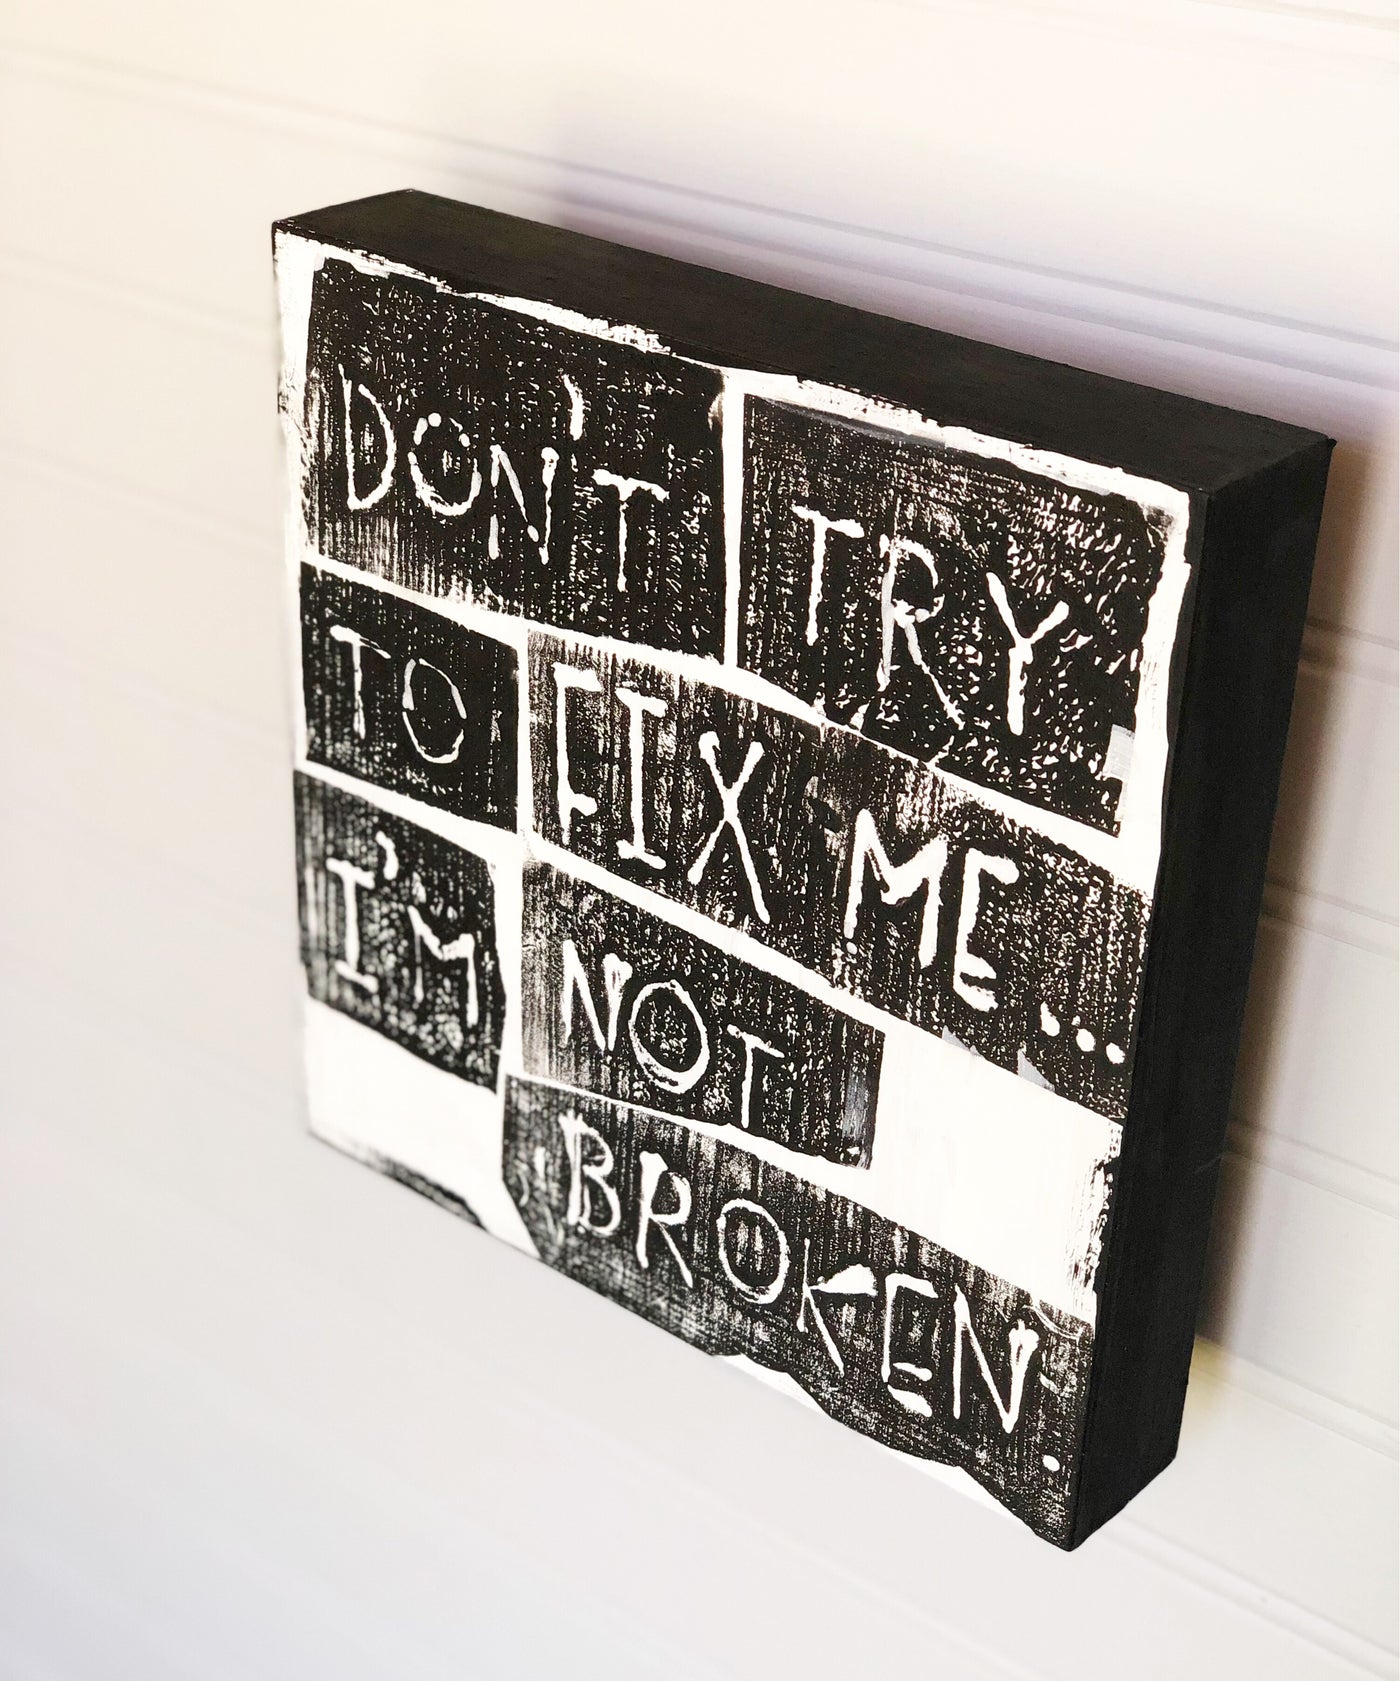 don't try to fix me - wood panel art